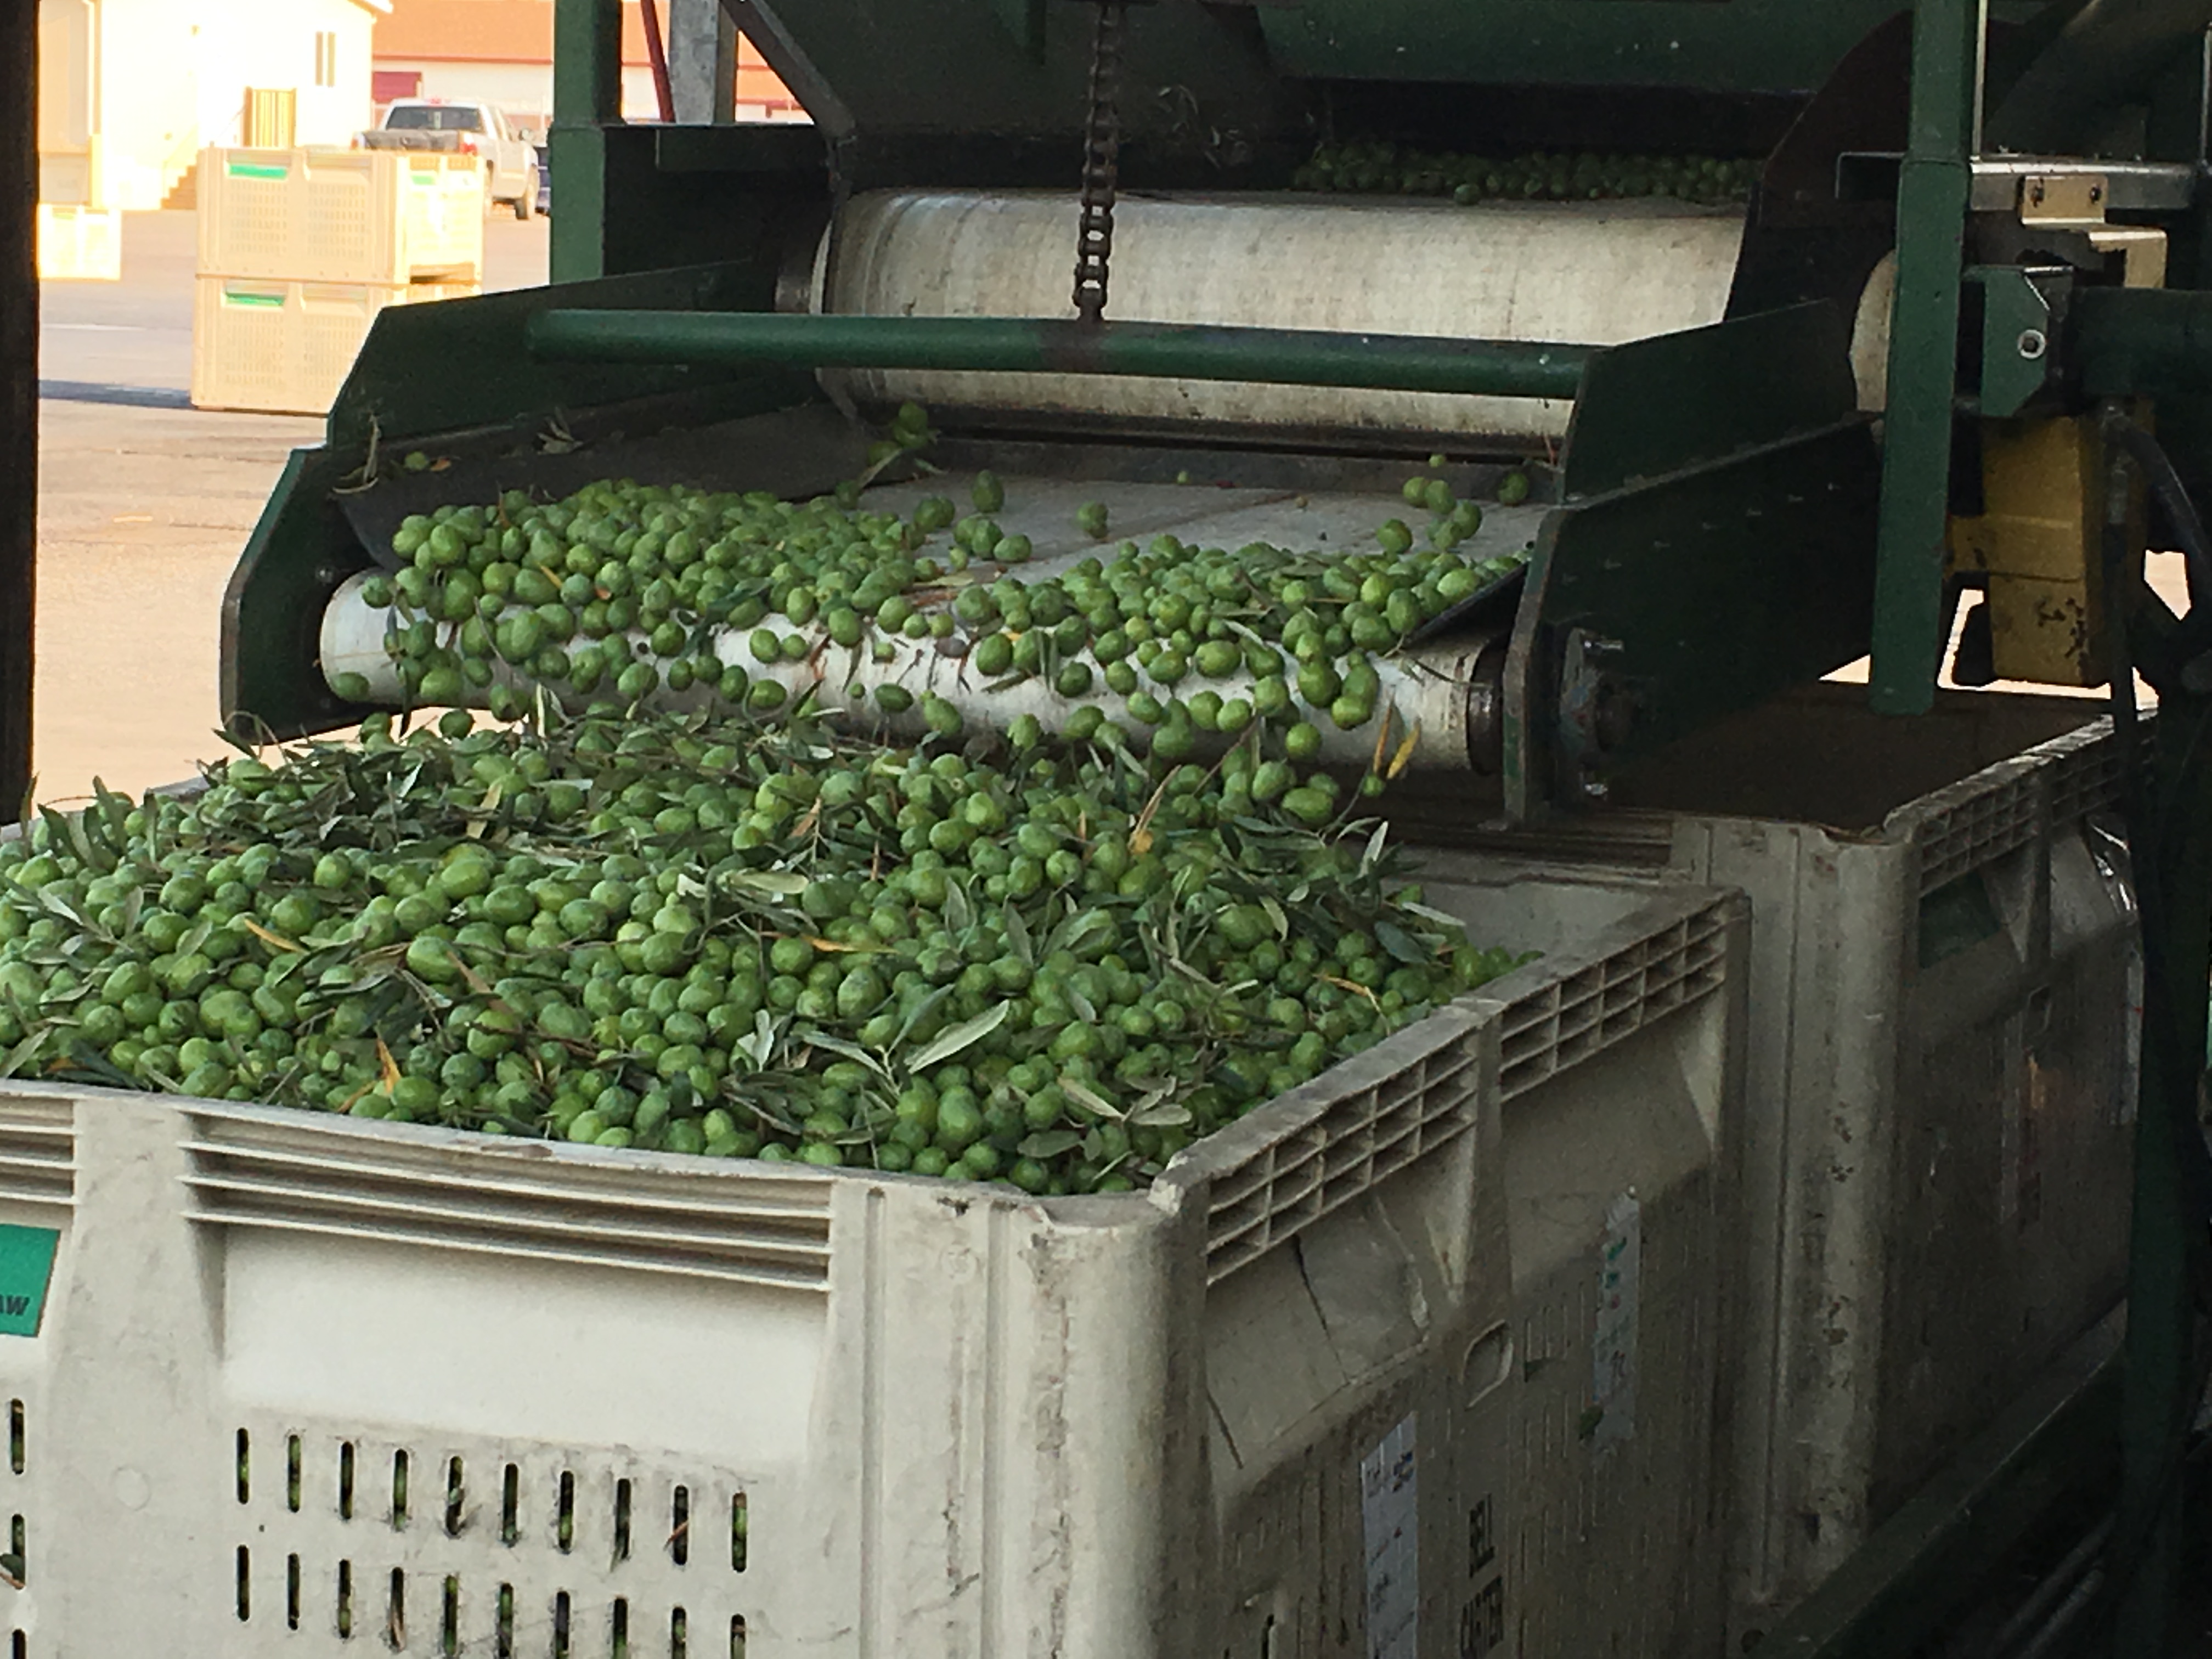 Photo of raw olives coming off conveyer belt by Phil Bourke